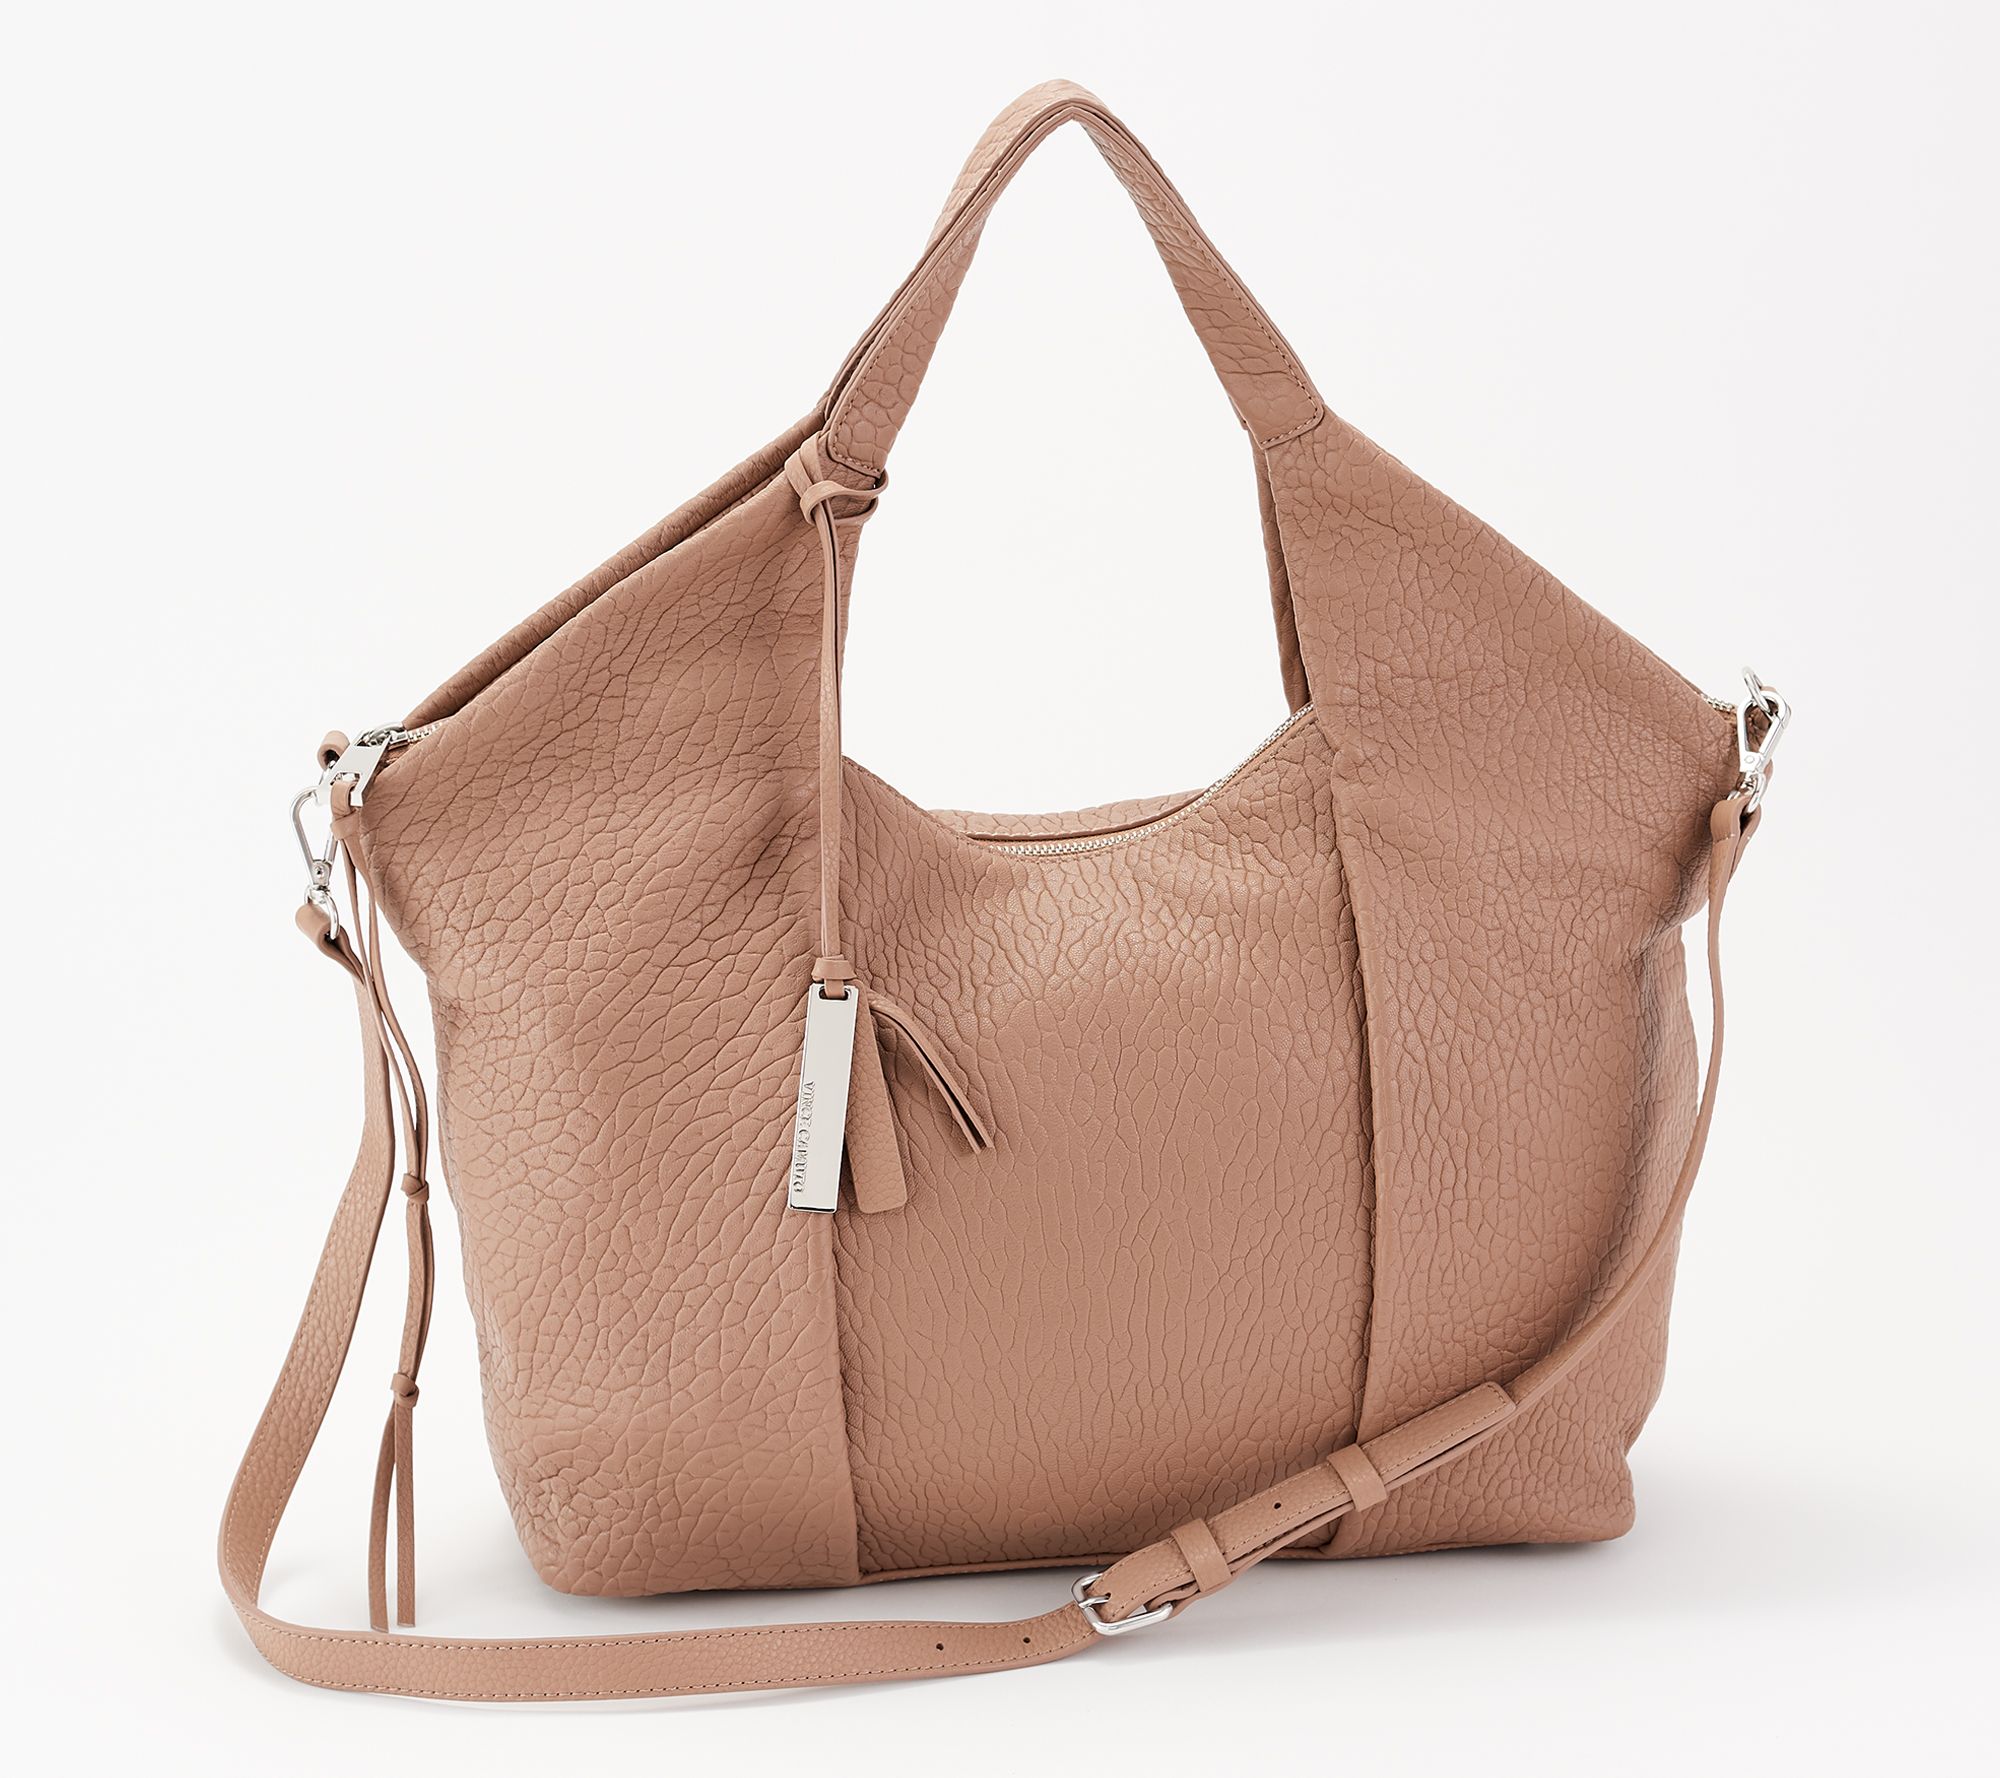 Vince Camuto Convertible Lamb Leather Pleated Tote - Steph - QVC.com